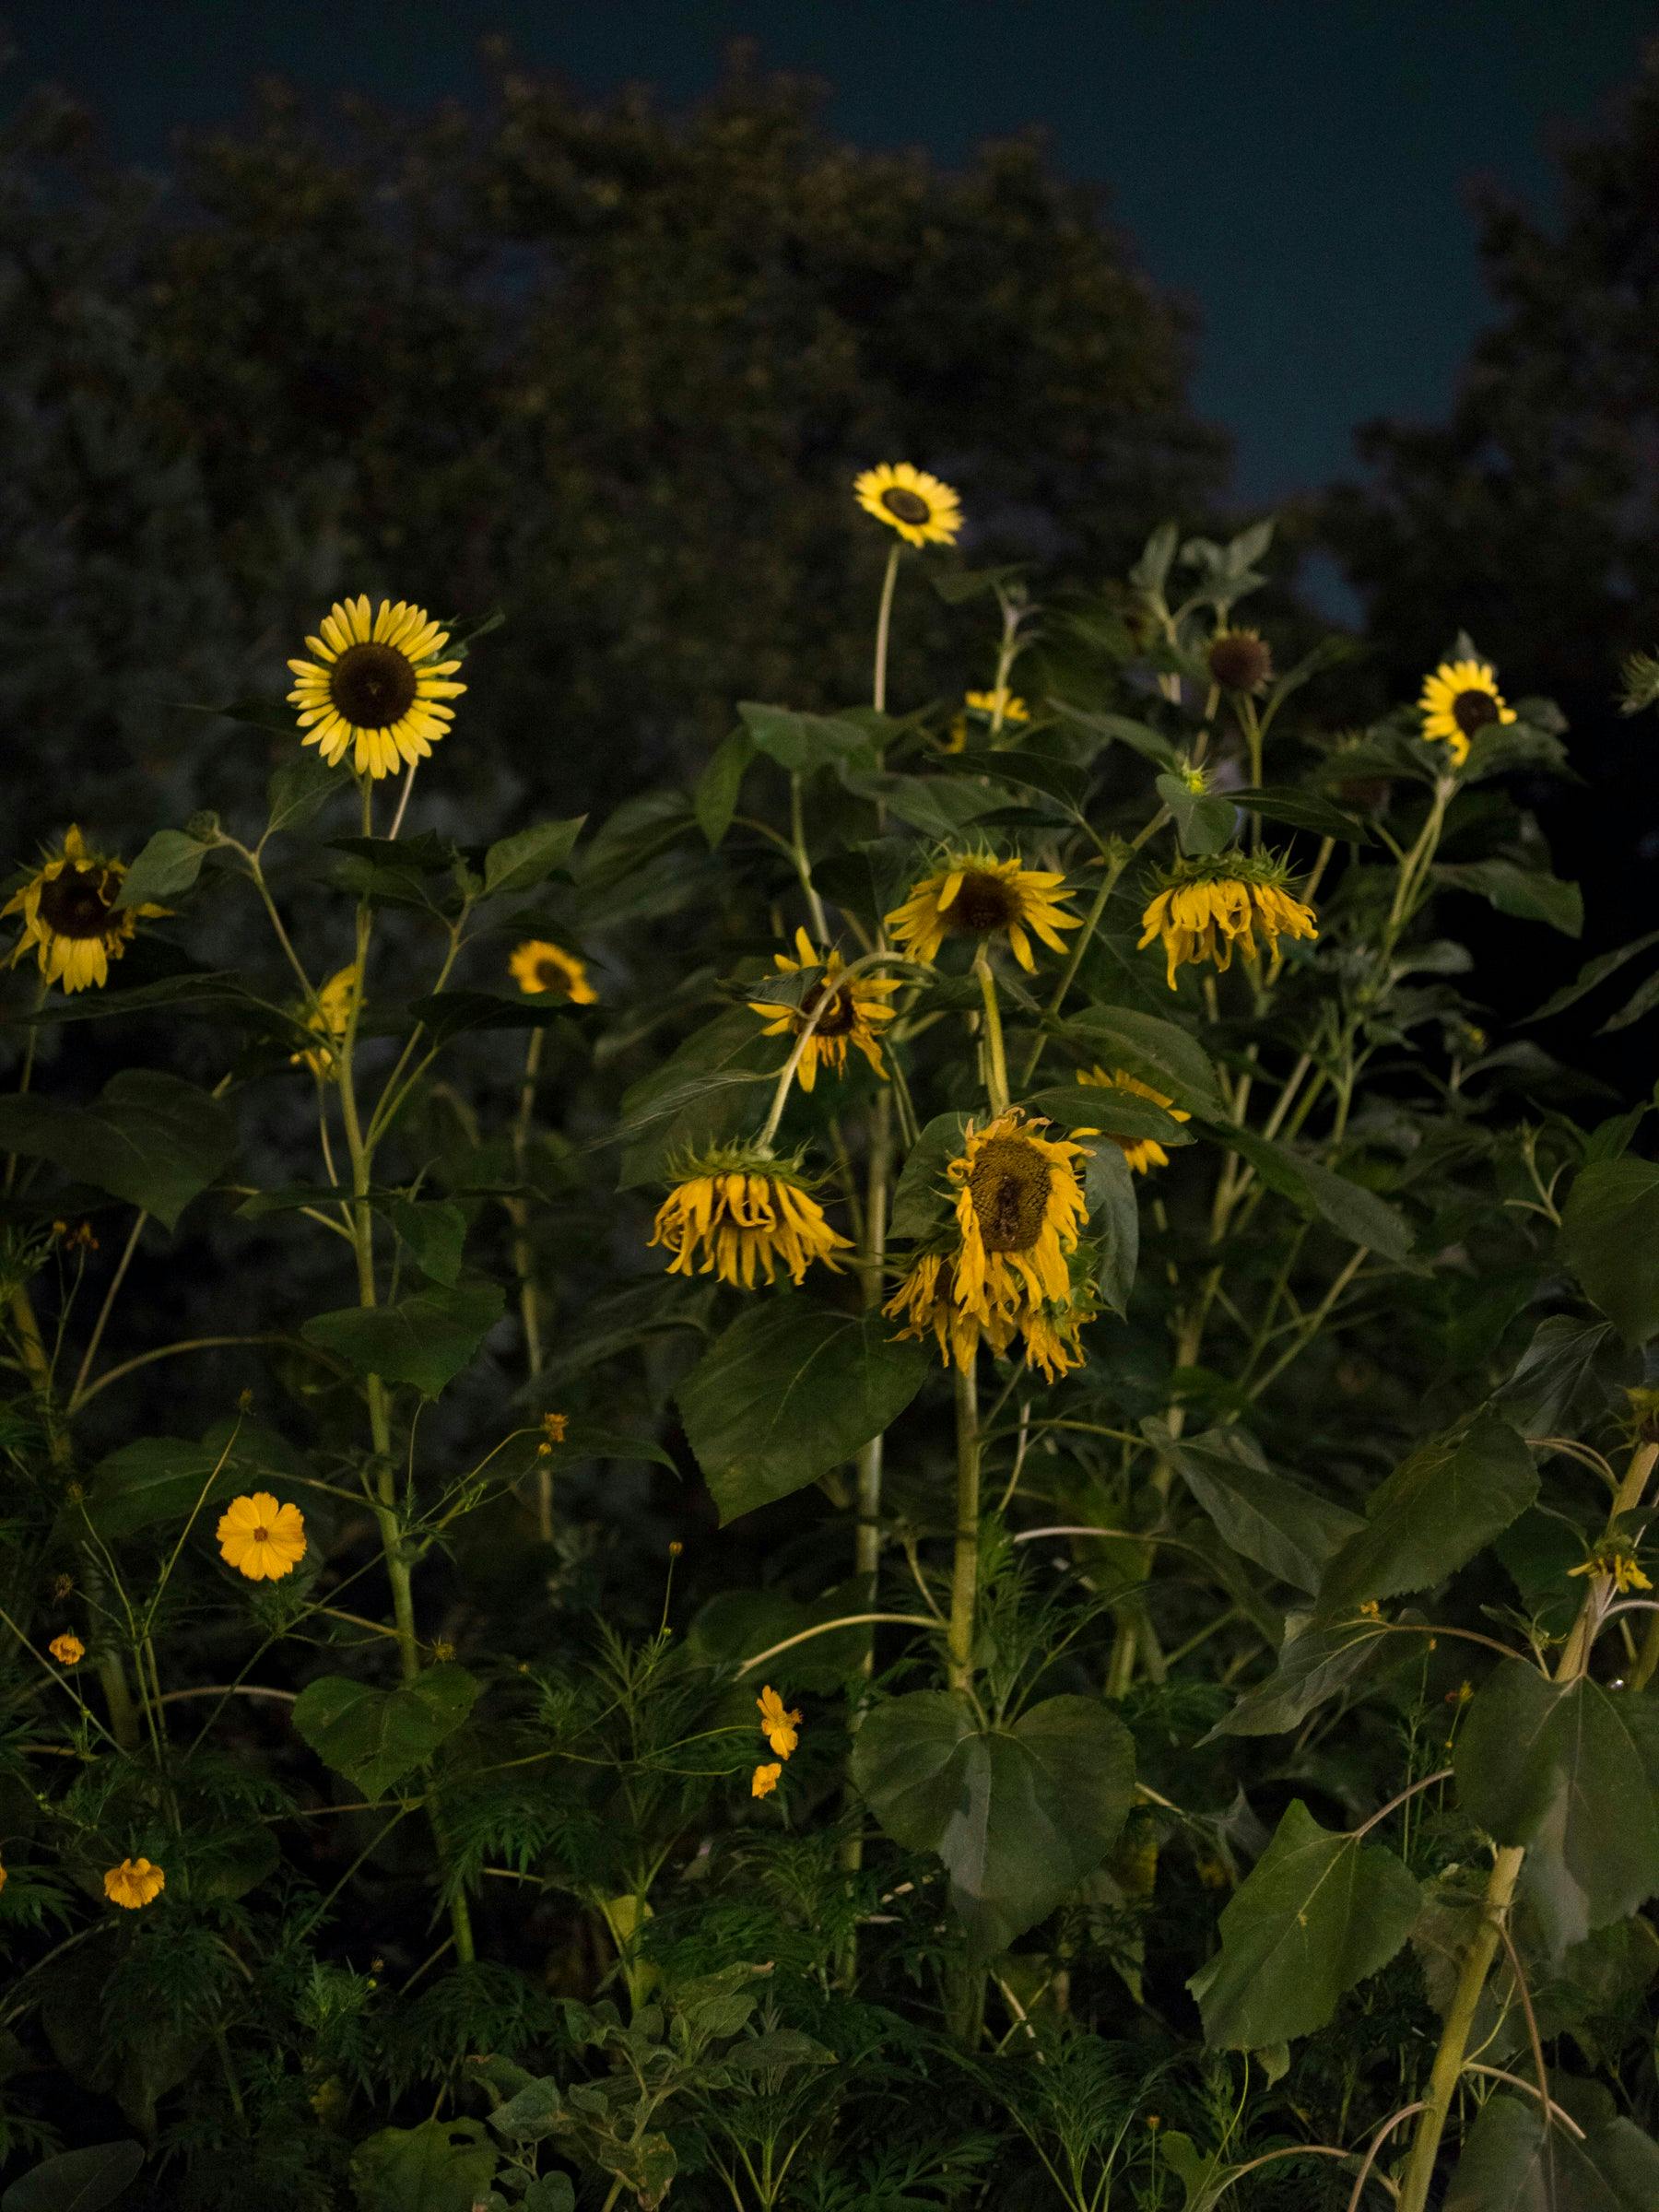 Photography by Anna Beeke titled "Midnight in the Garden #123".